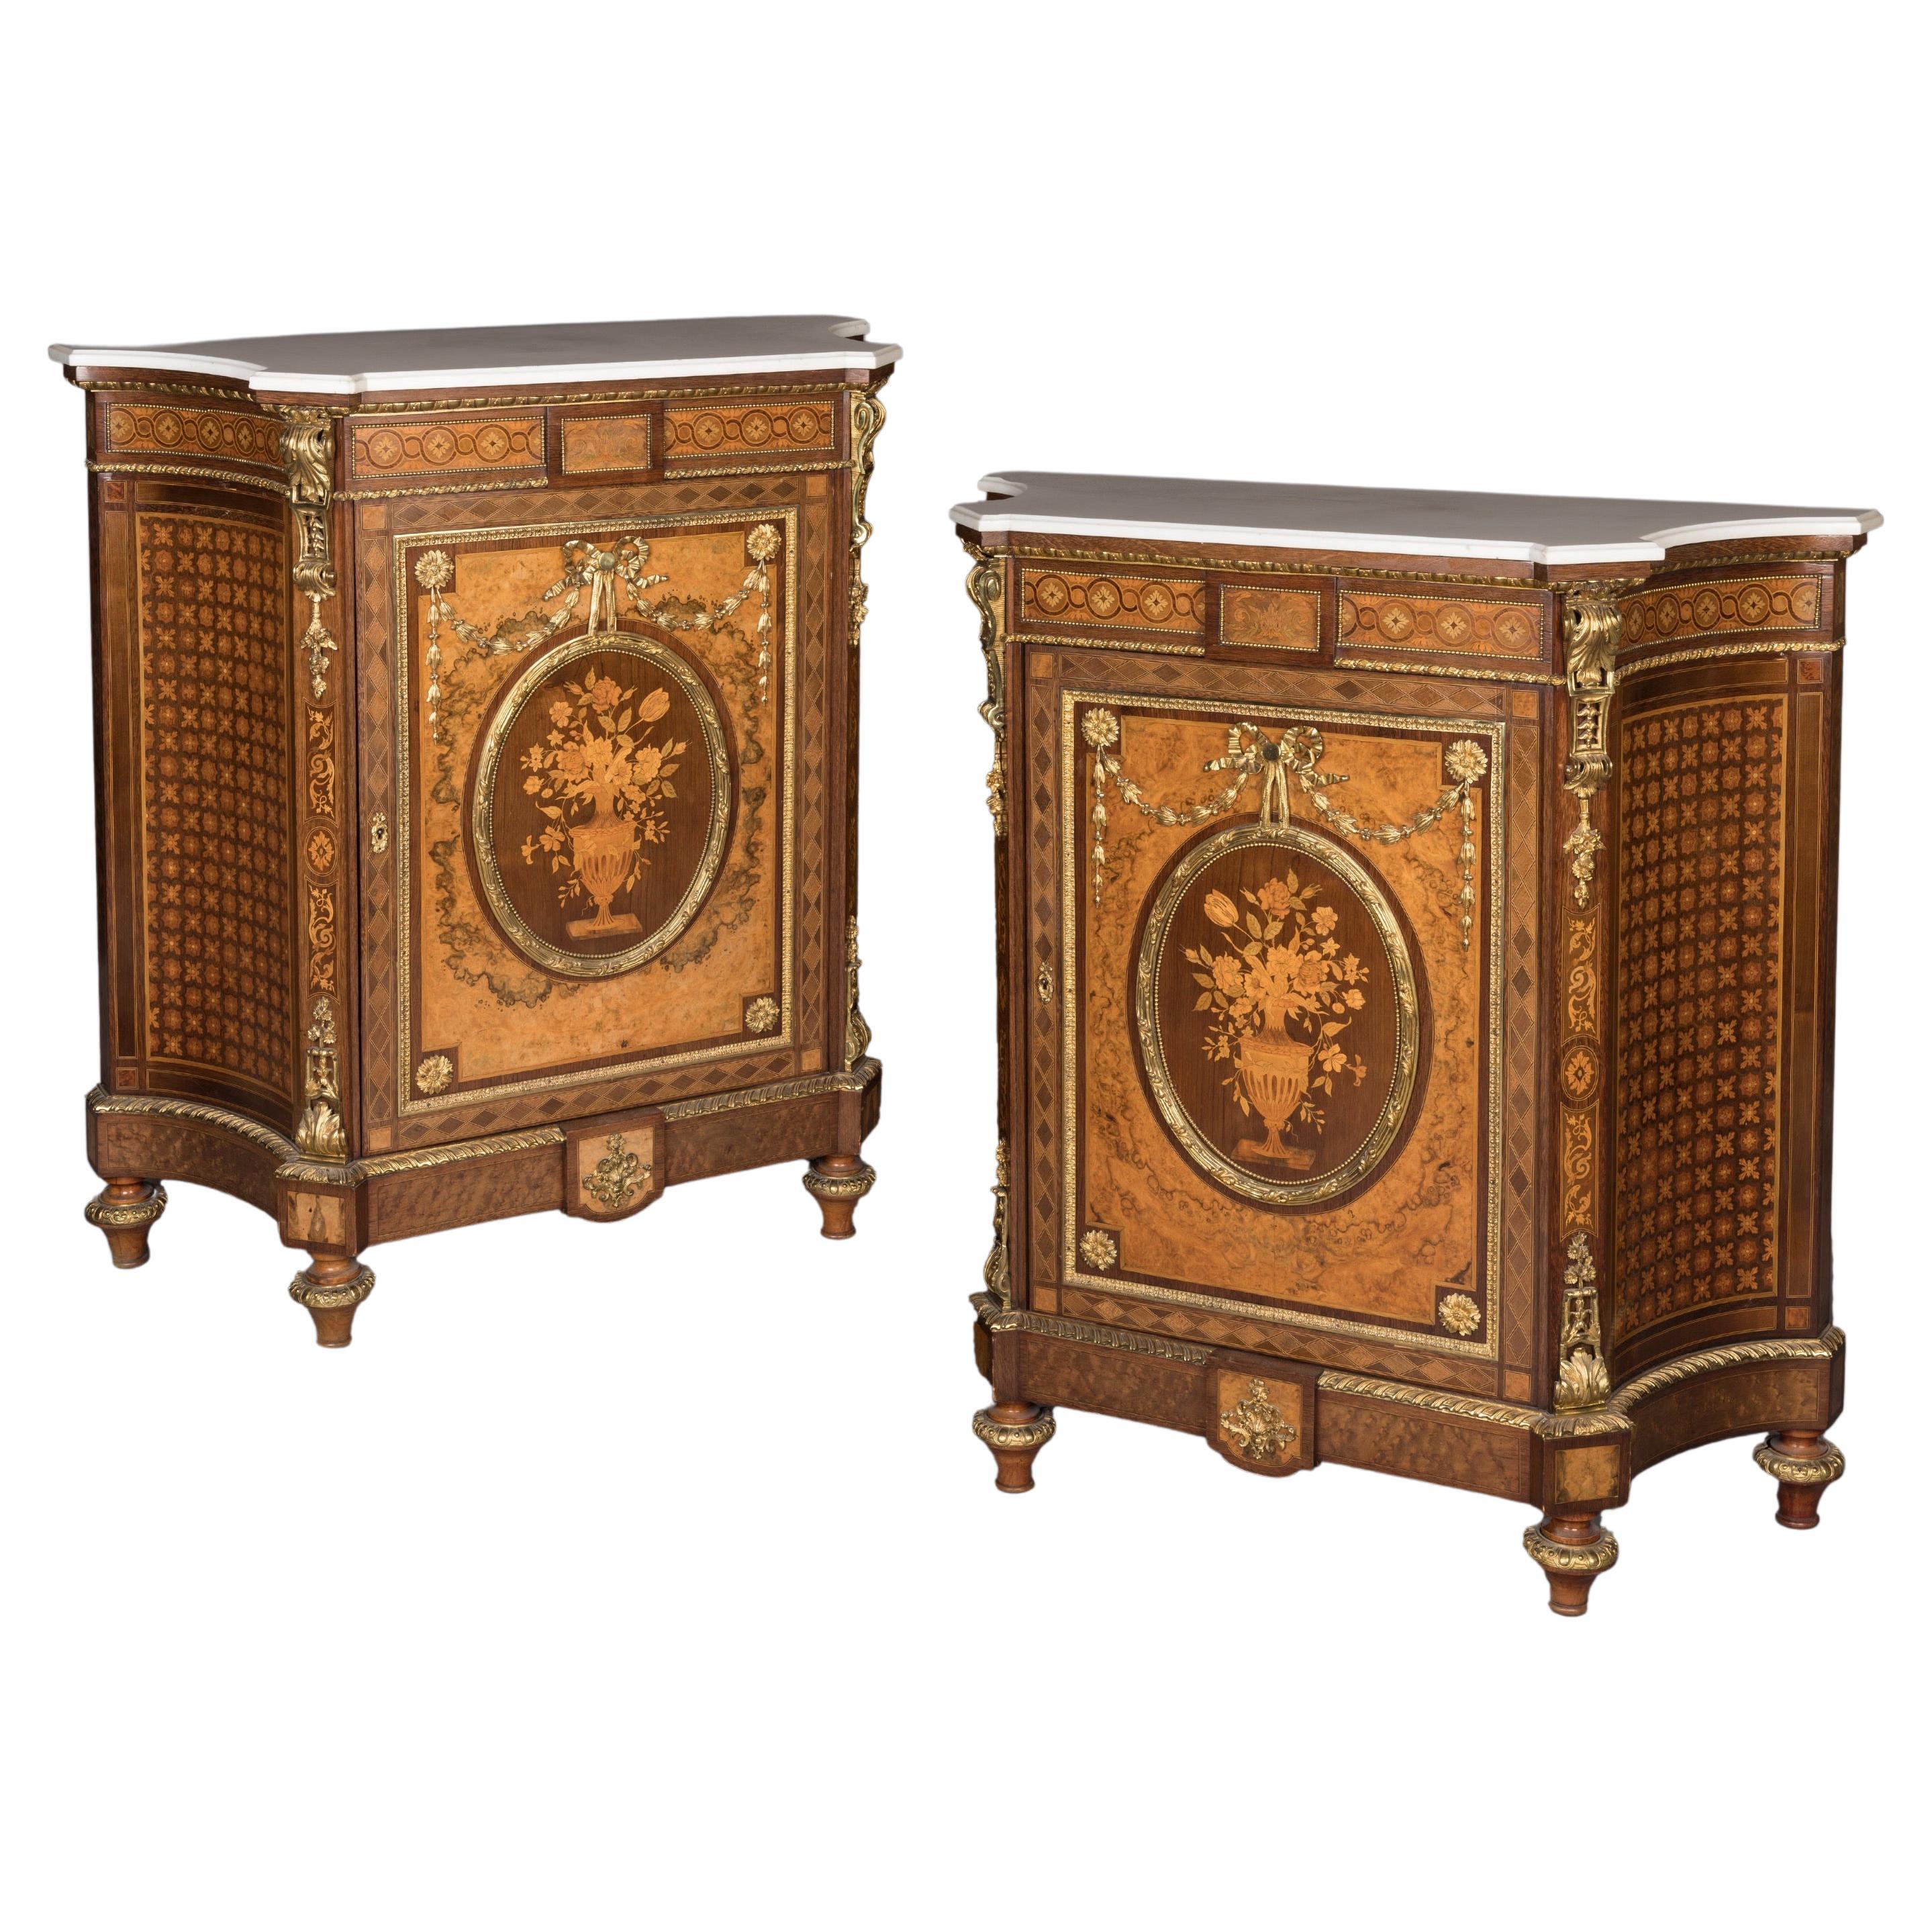 Pair of 19th Century French Floral Marquetry Cabinets with Carrara Marble Tops For Sale